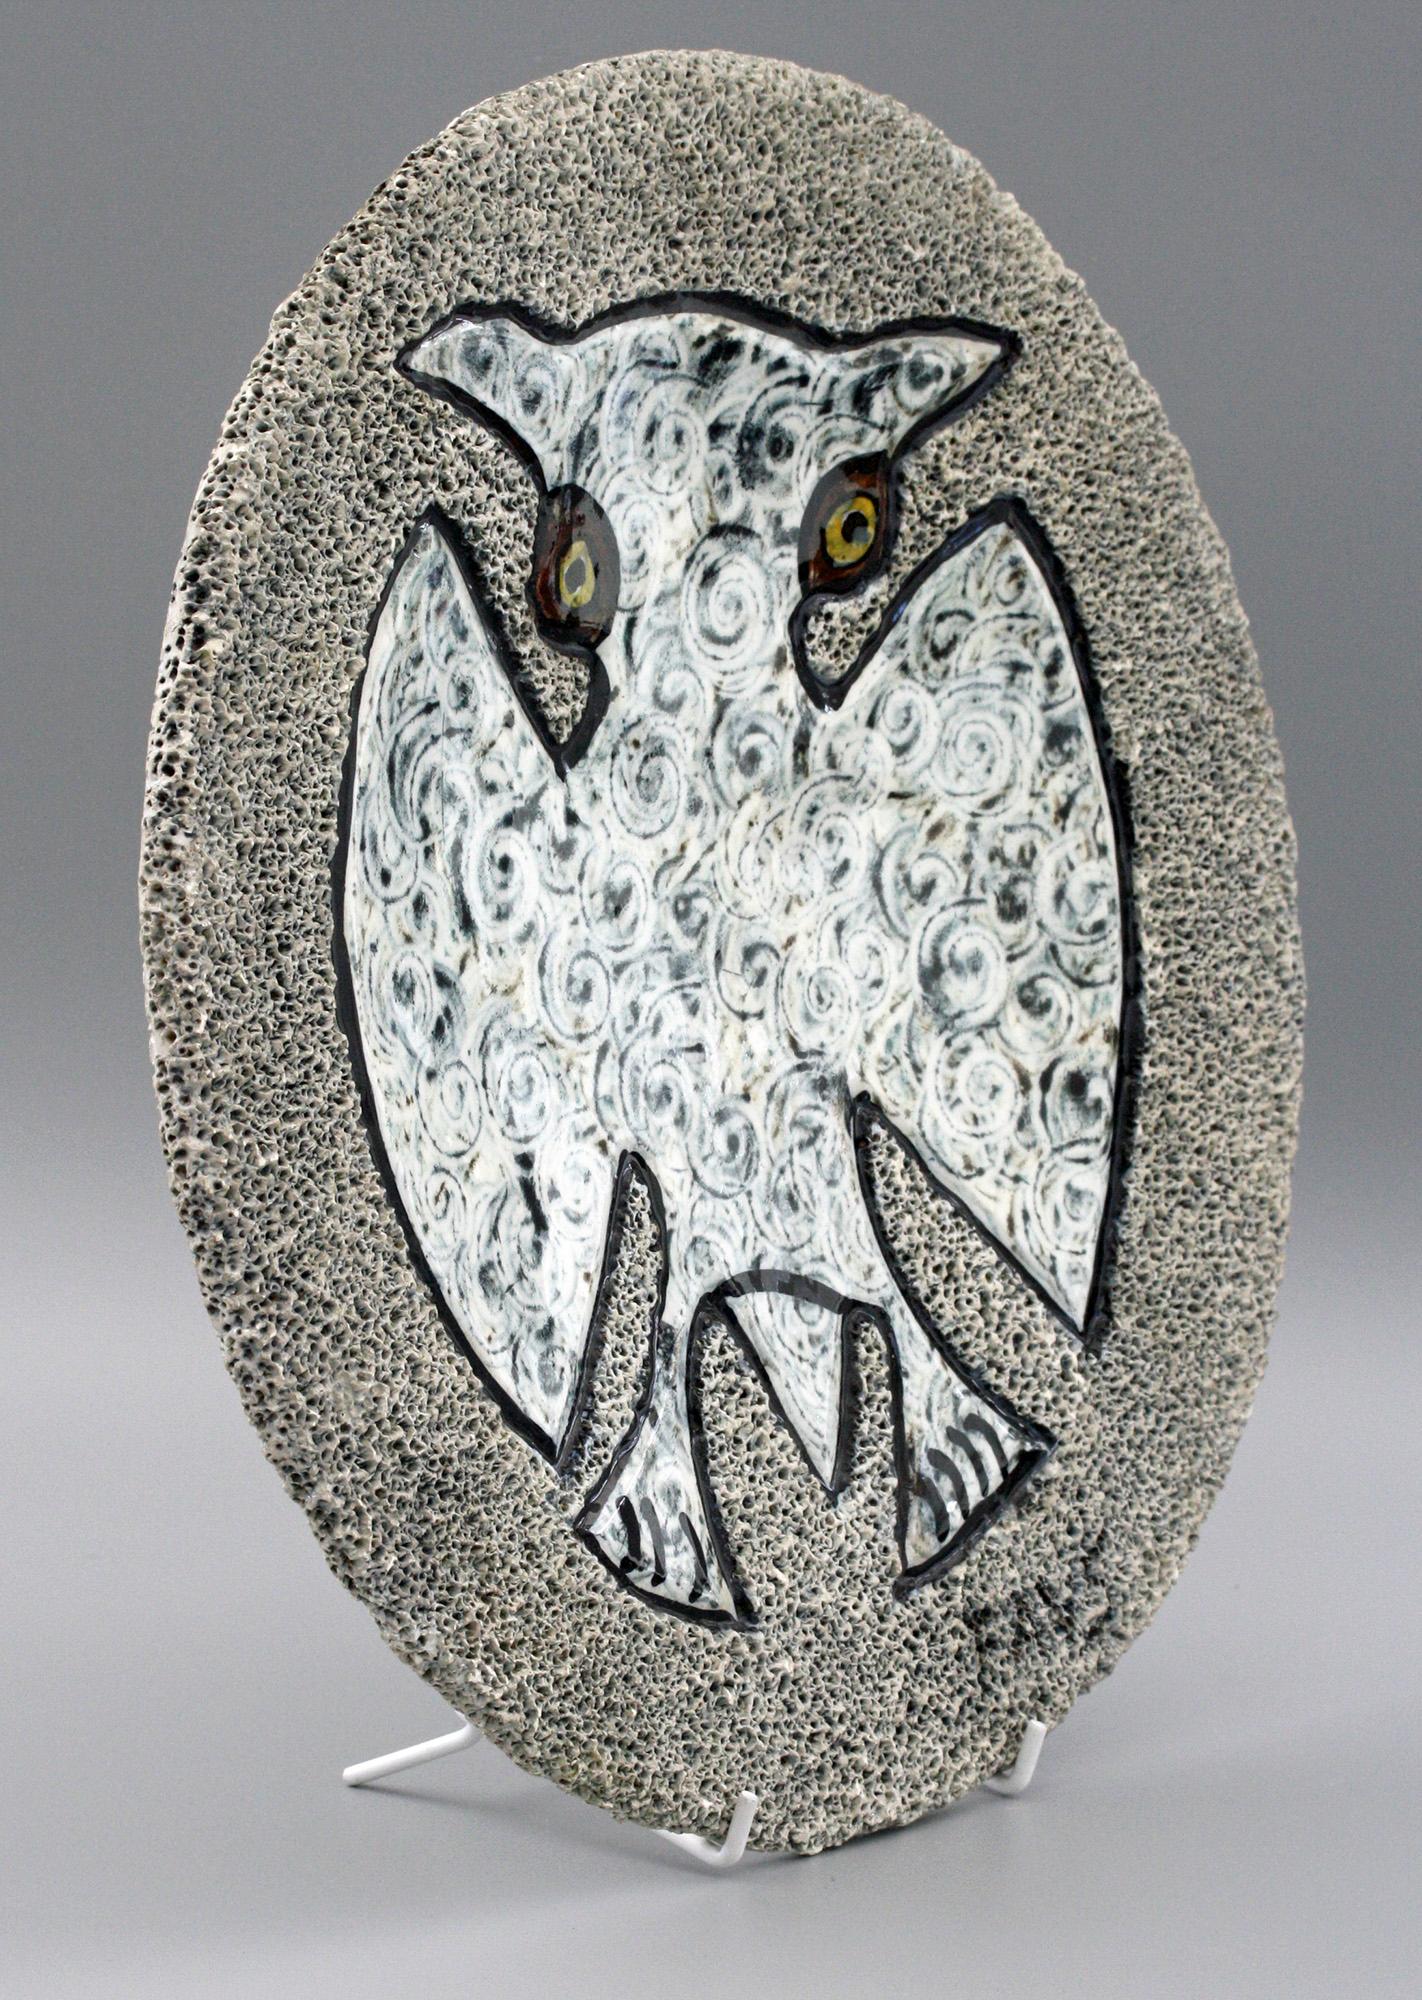 Midcentury Stylized Owl Pottery Lava Glazed Wall Plaque Signed FAVS 1